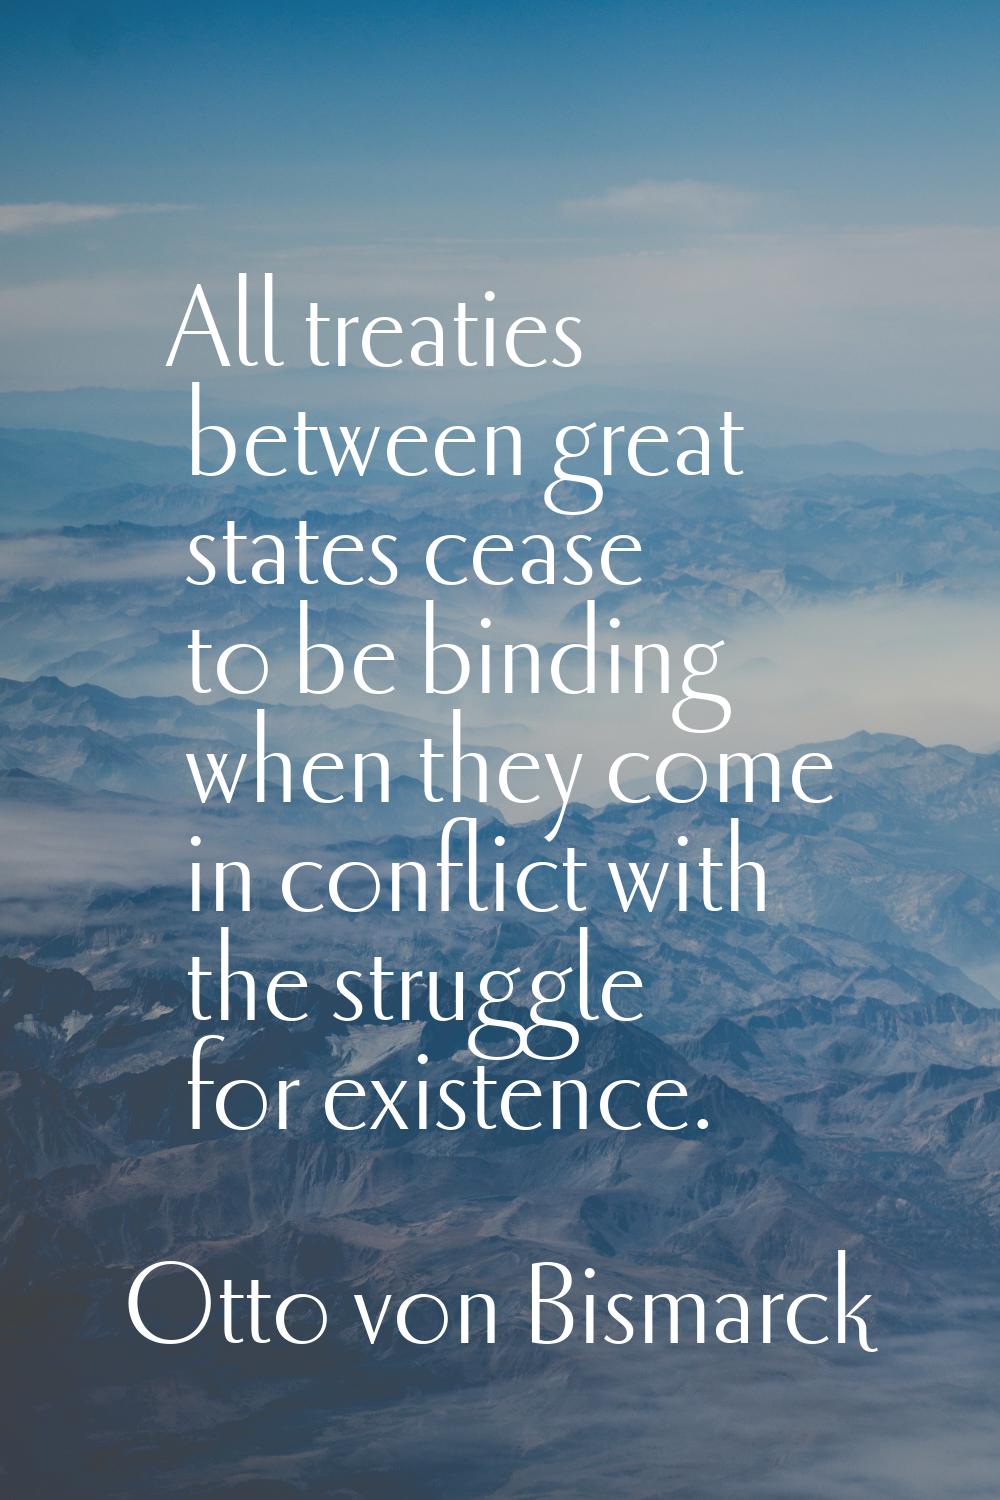 All treaties between great states cease to be binding when they come in conflict with the struggle 